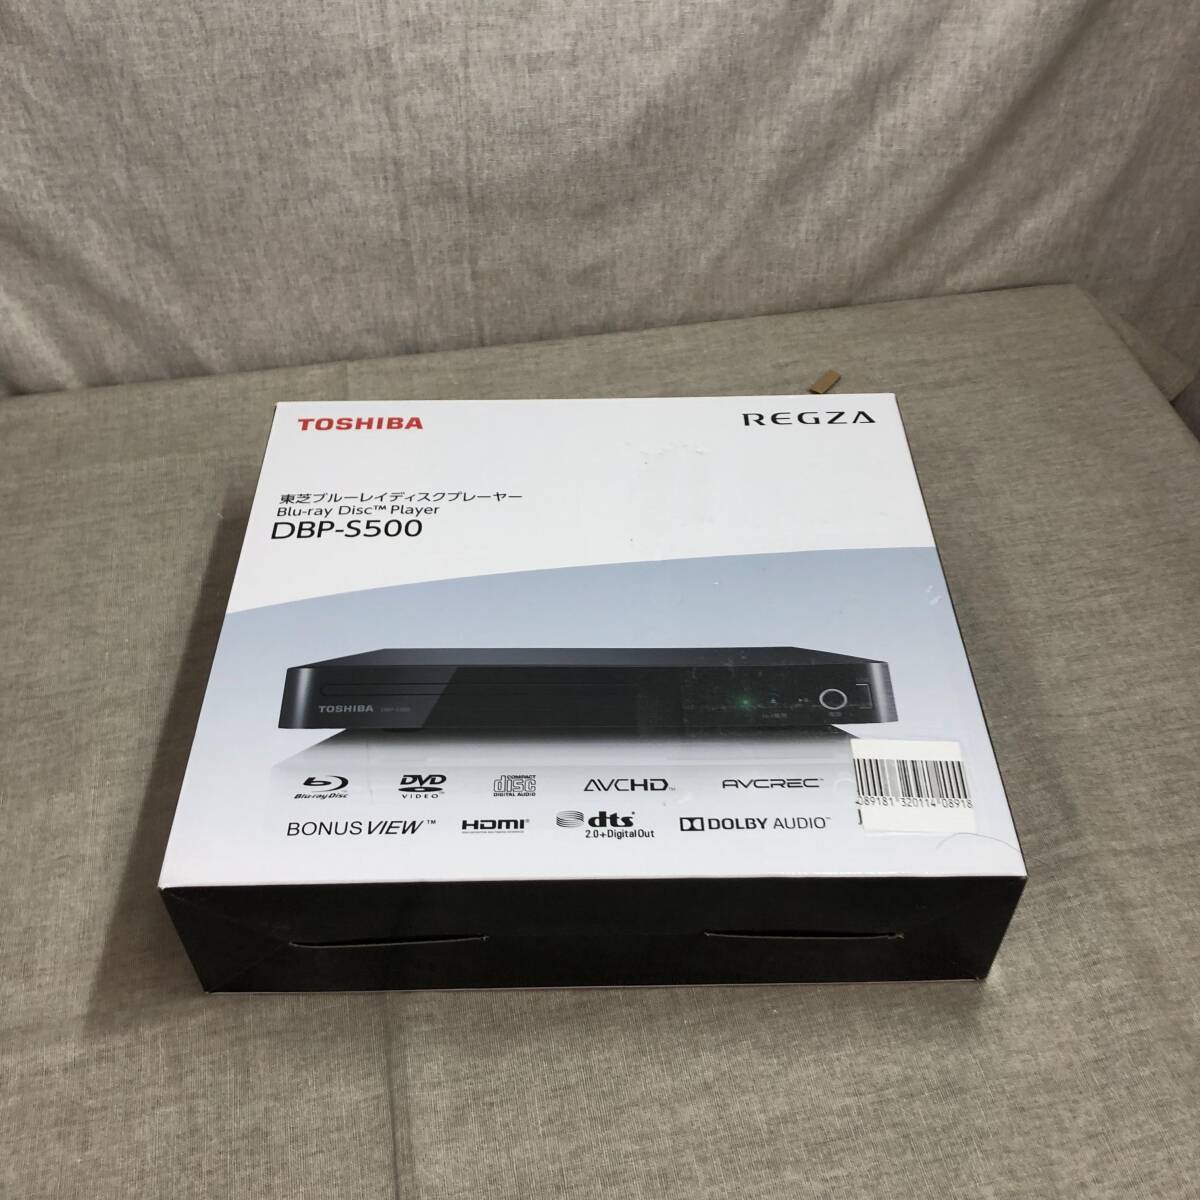  present condition goods REGZA Regza Blue-ray player HDMI playback only DBP-S500